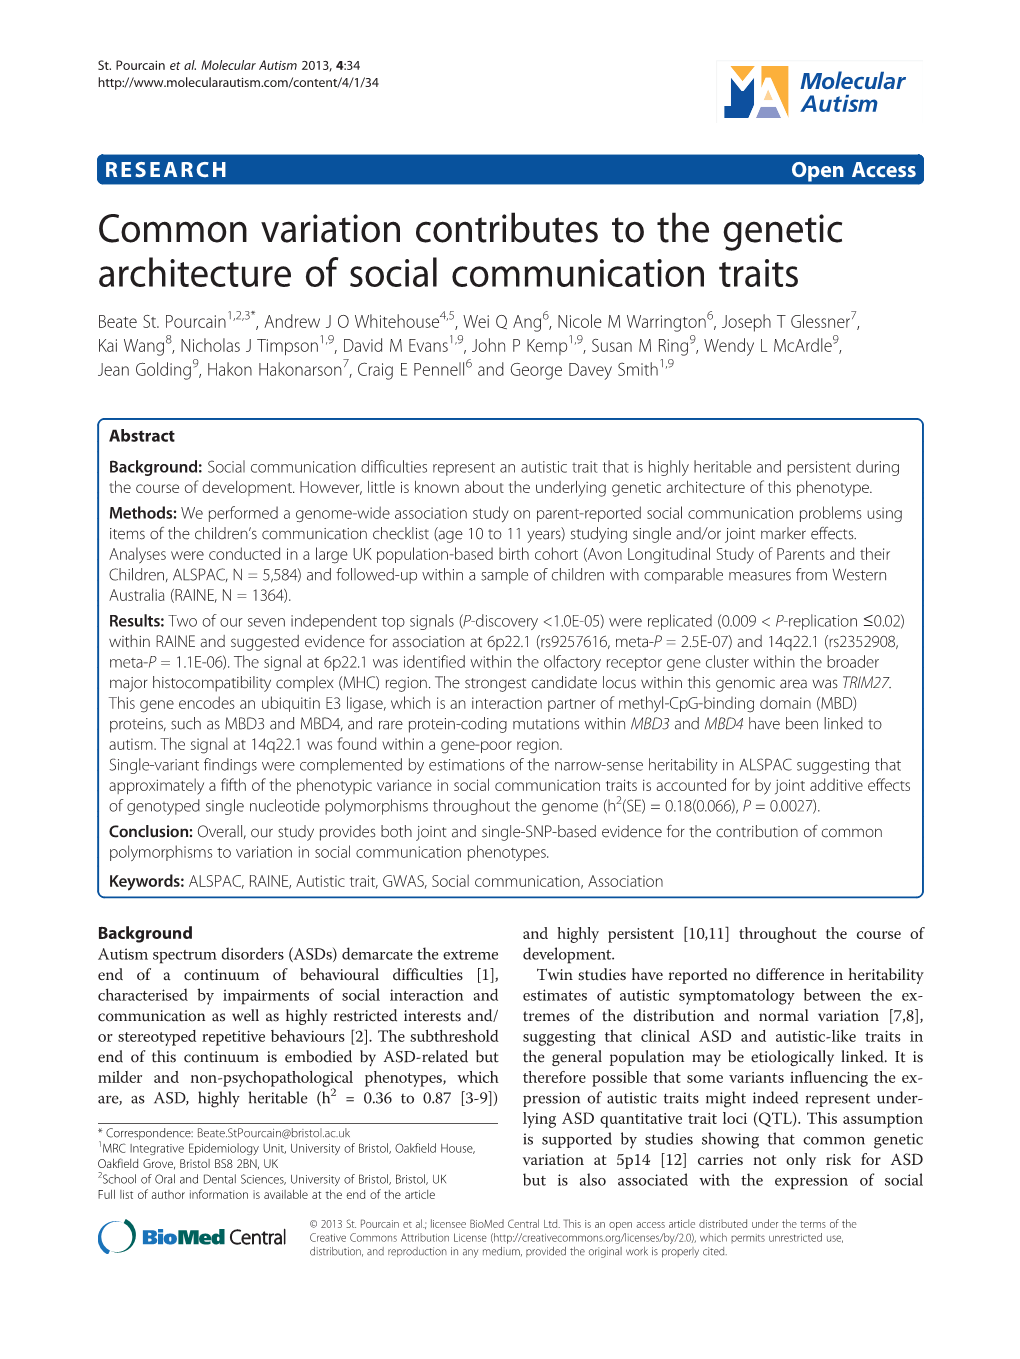 Common Variation Contributes to the Genetic Architecture of Social Communication Traits Beate St